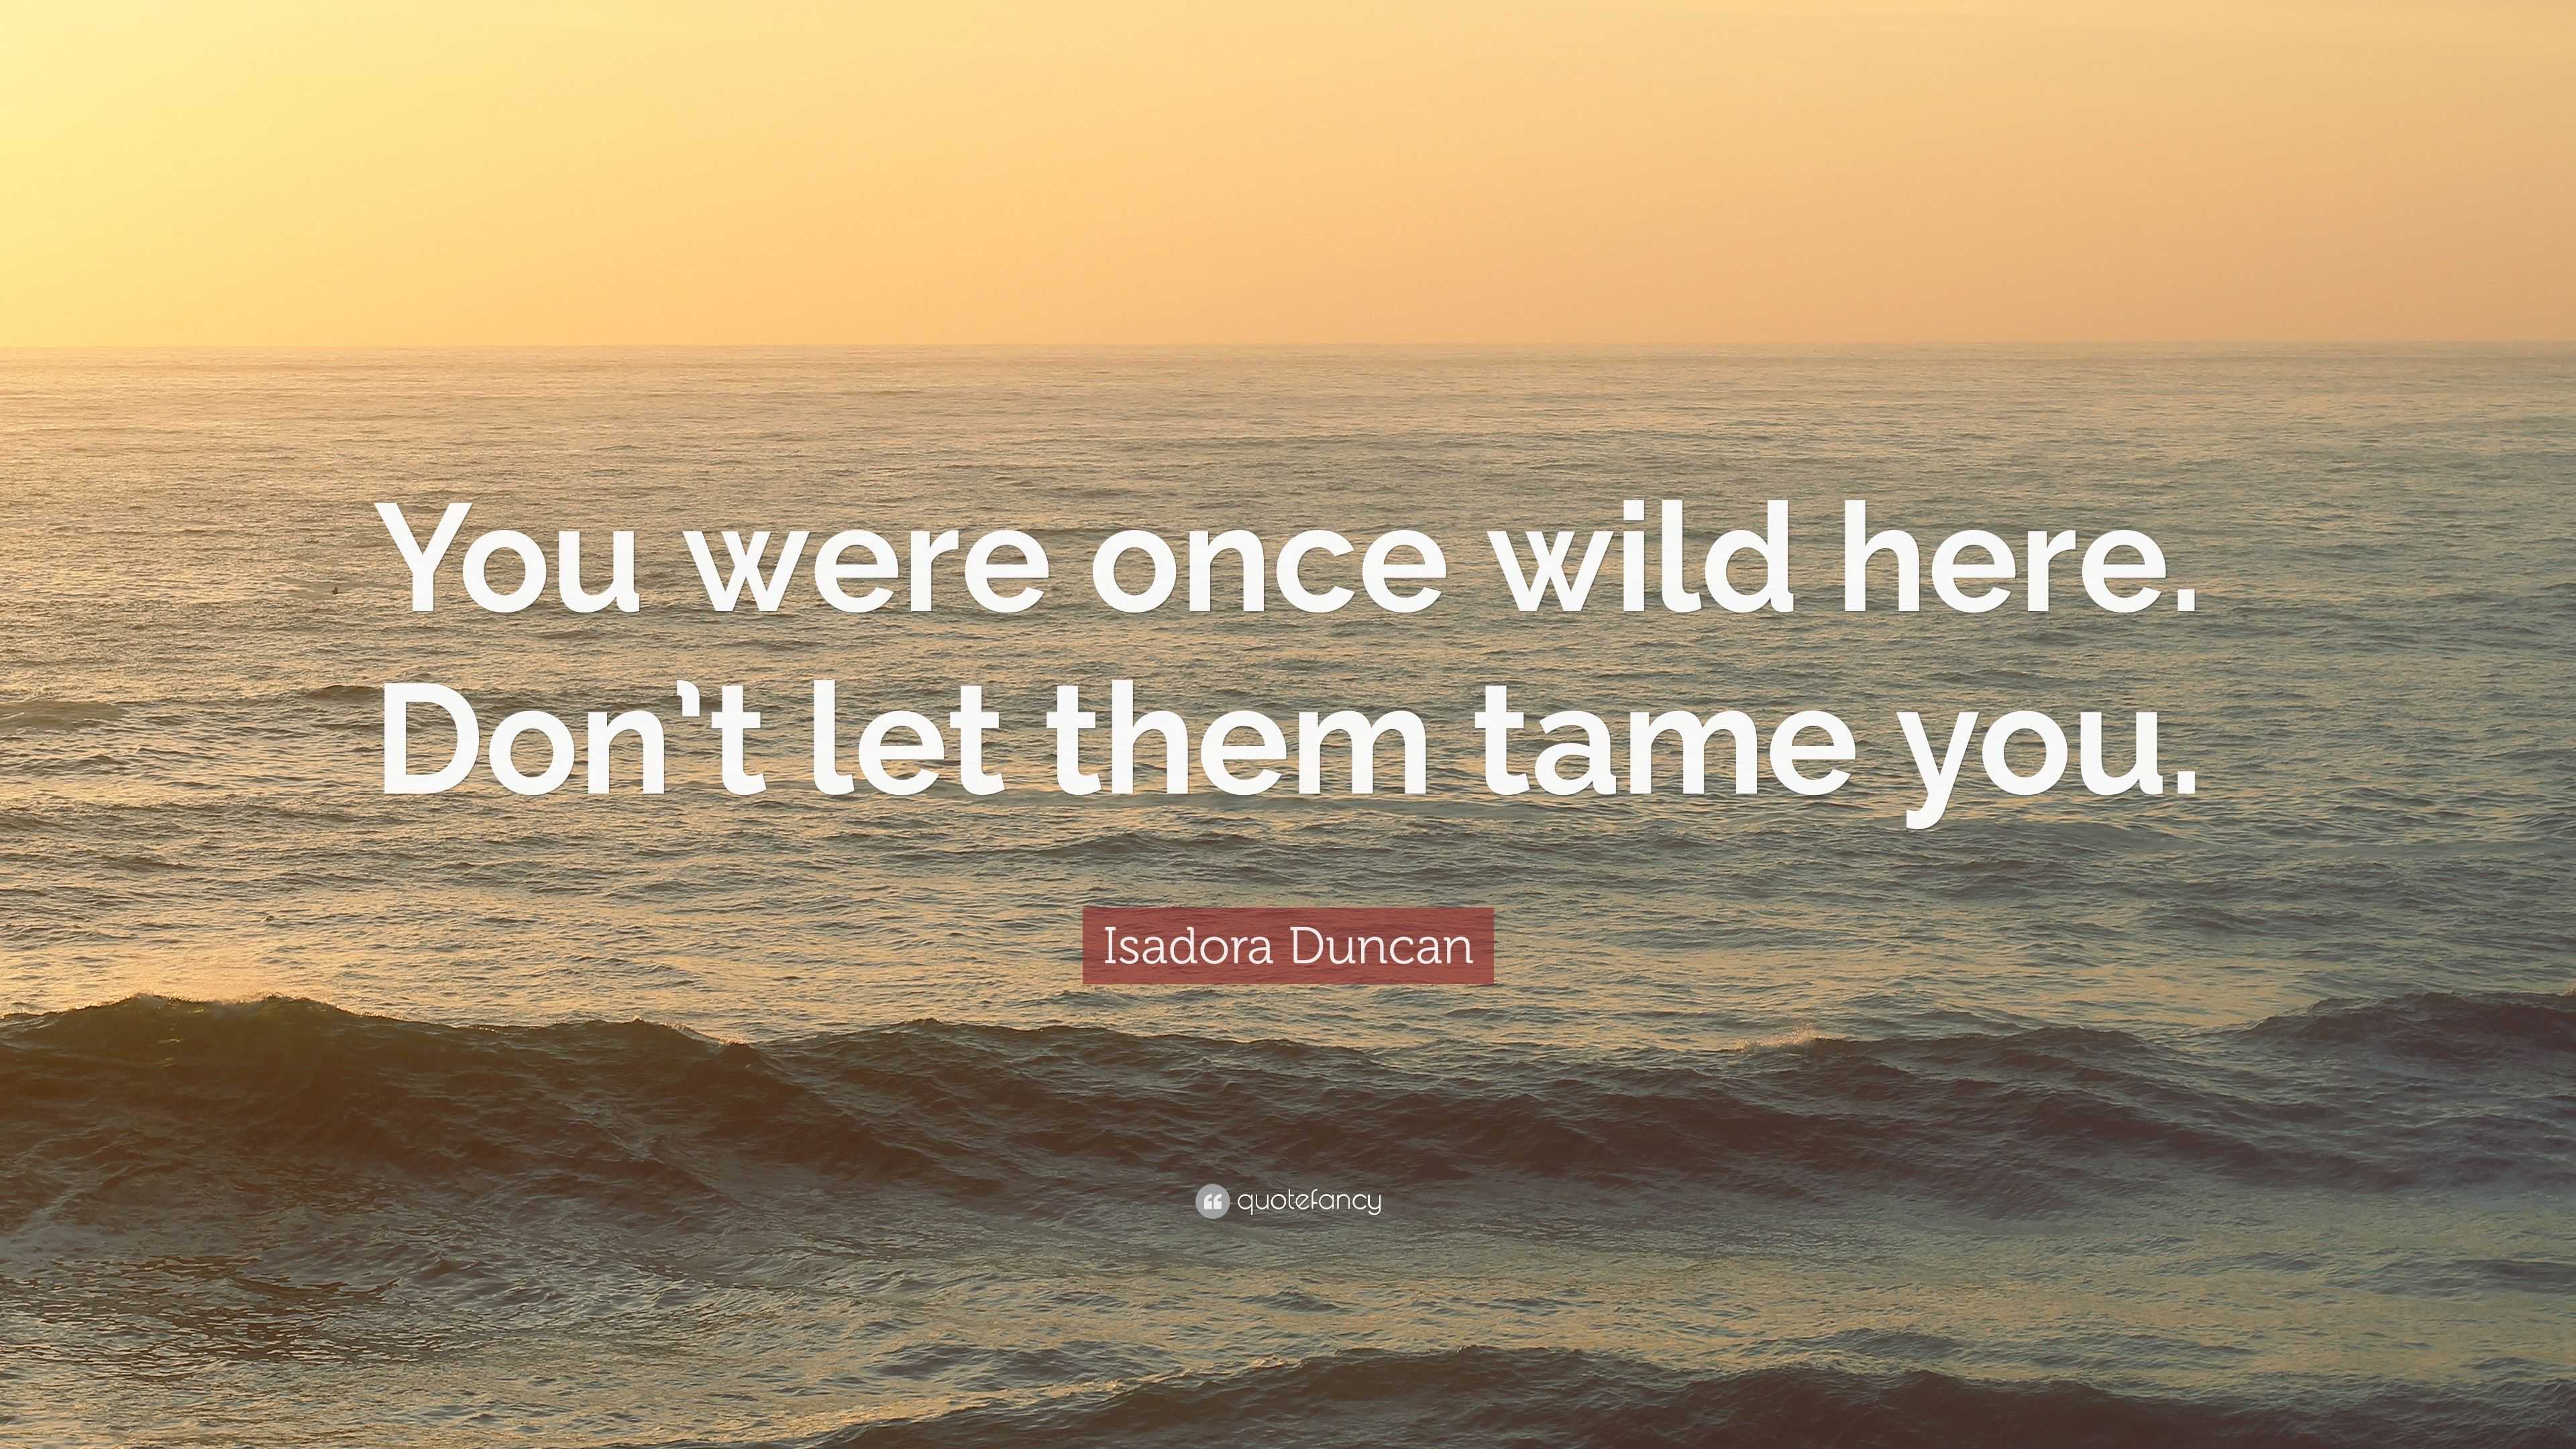 isadora duncan quotes you were wild here once